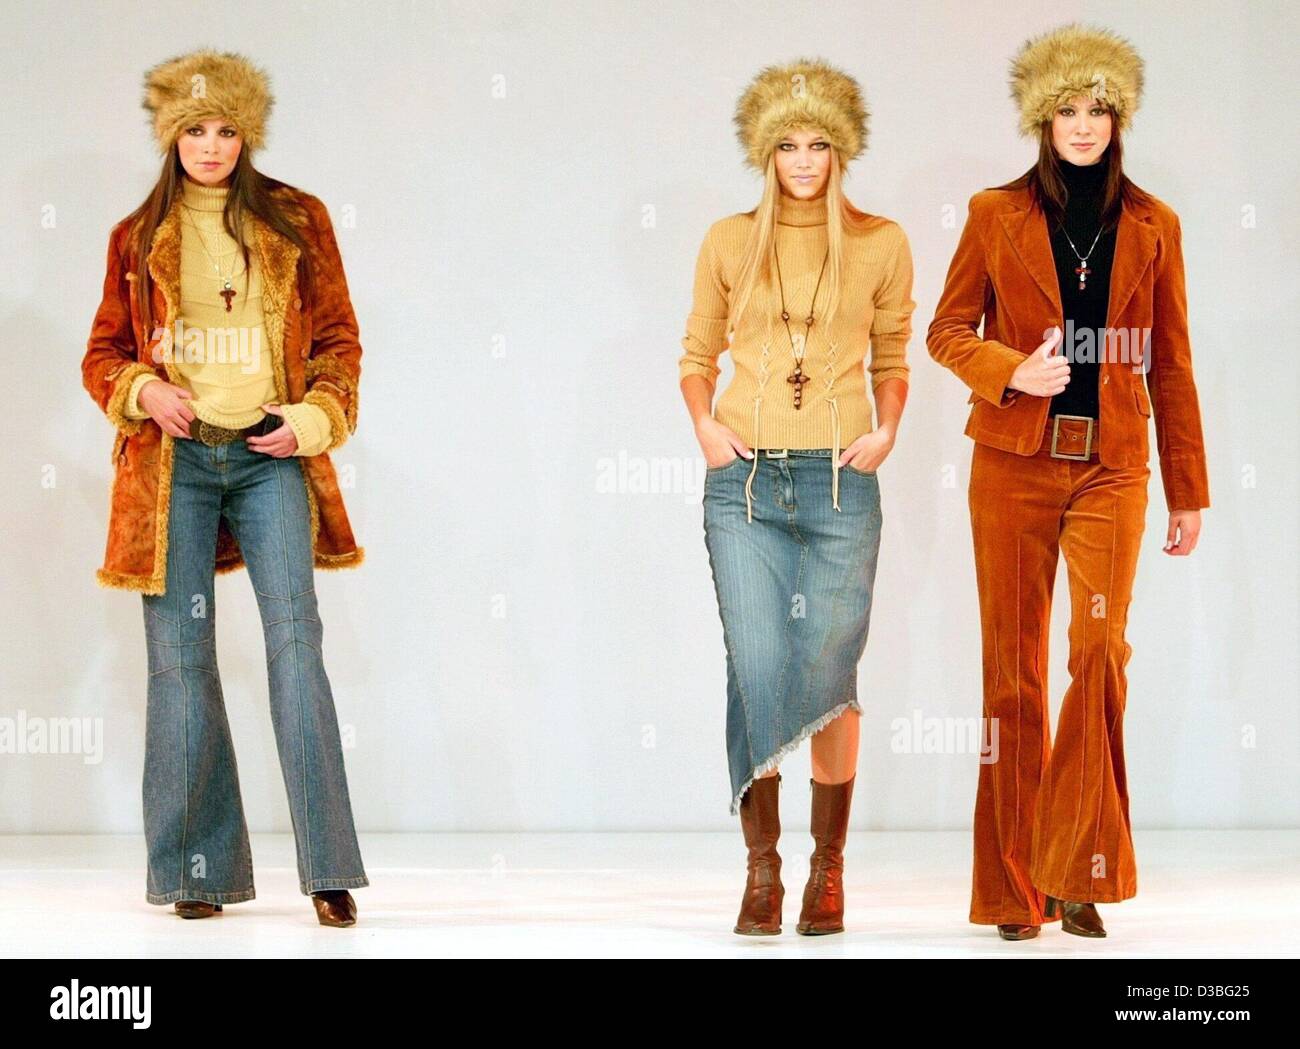 (dpa) - Three models pose on the catwalk and present the fashion collection for the autmn and winter season 2003/2004 during a fashion show at the Intercontinental hotel in Hamburg, Germany, 24 June 2003. Stock Photo